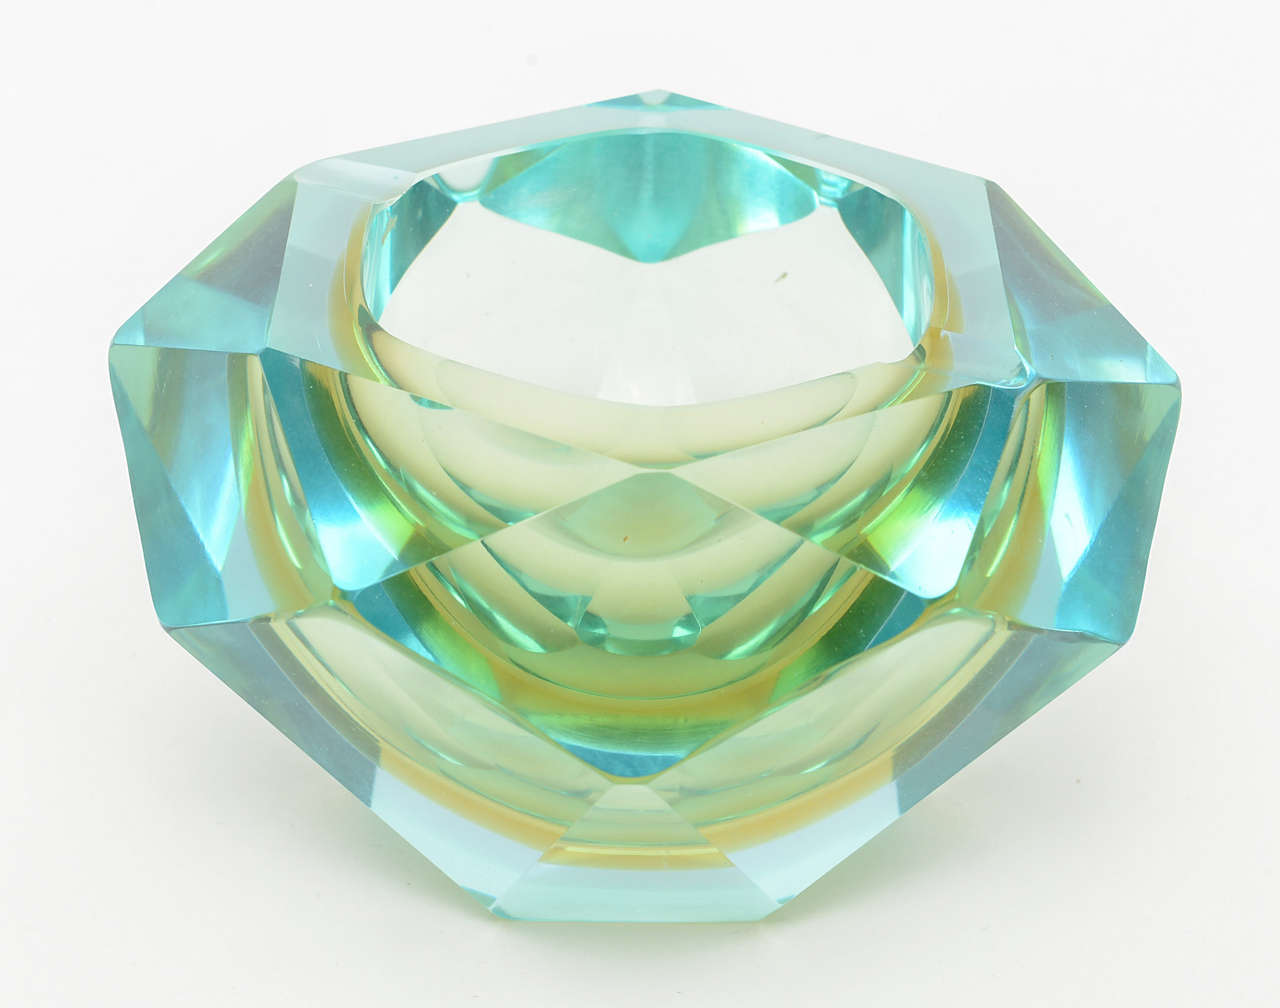 Faceted bowl in lightest of translucent colors.